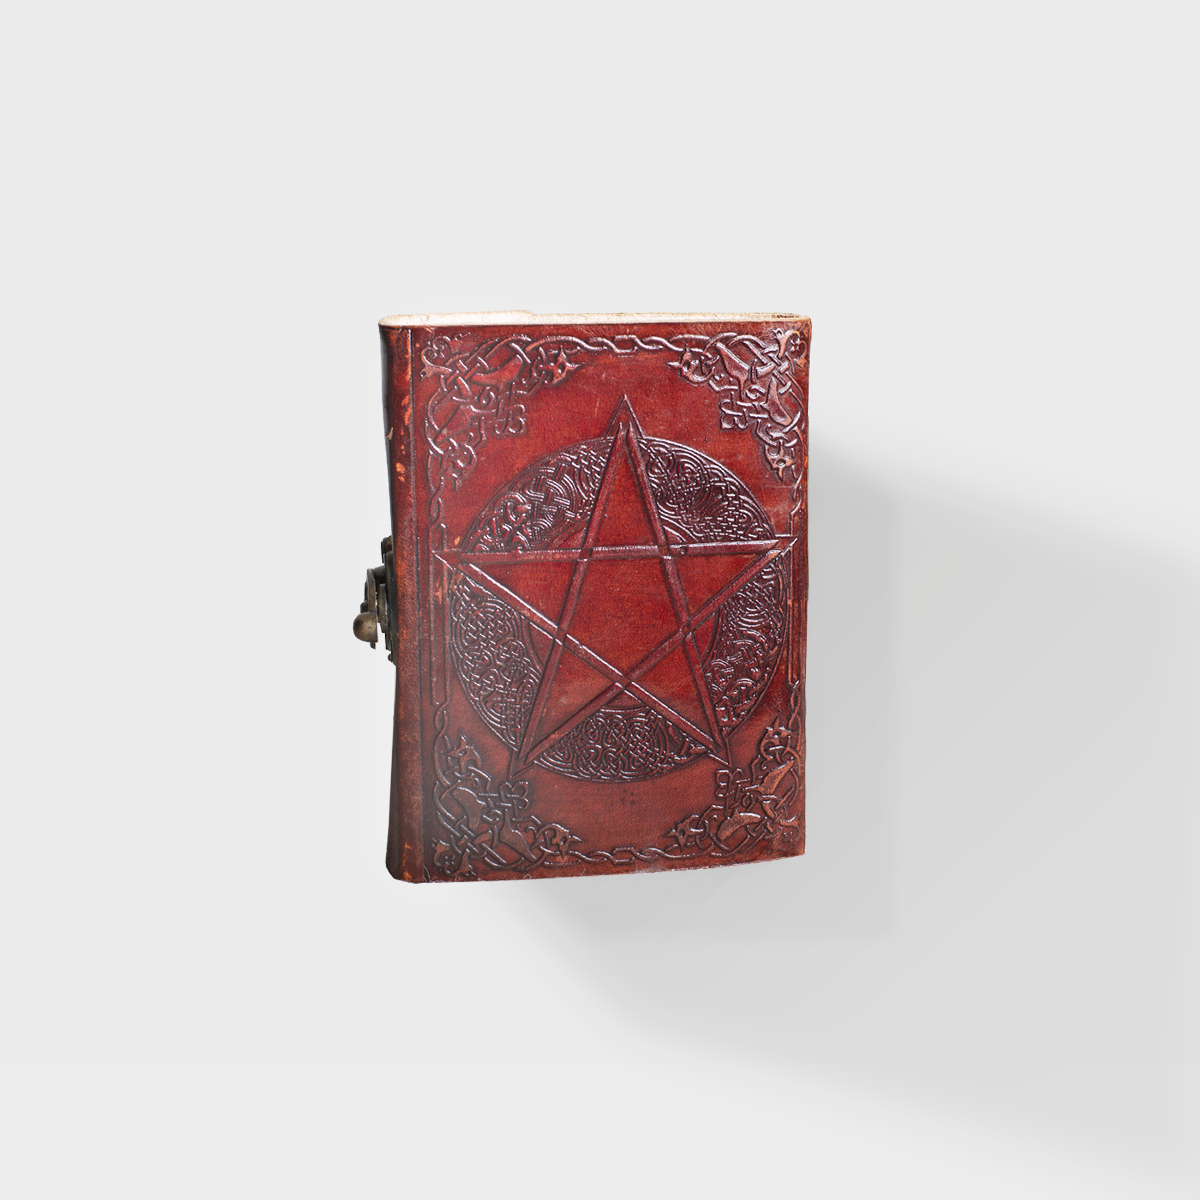 Pentacle Journal and Spell Book - 9x6 - Large Leather Journal